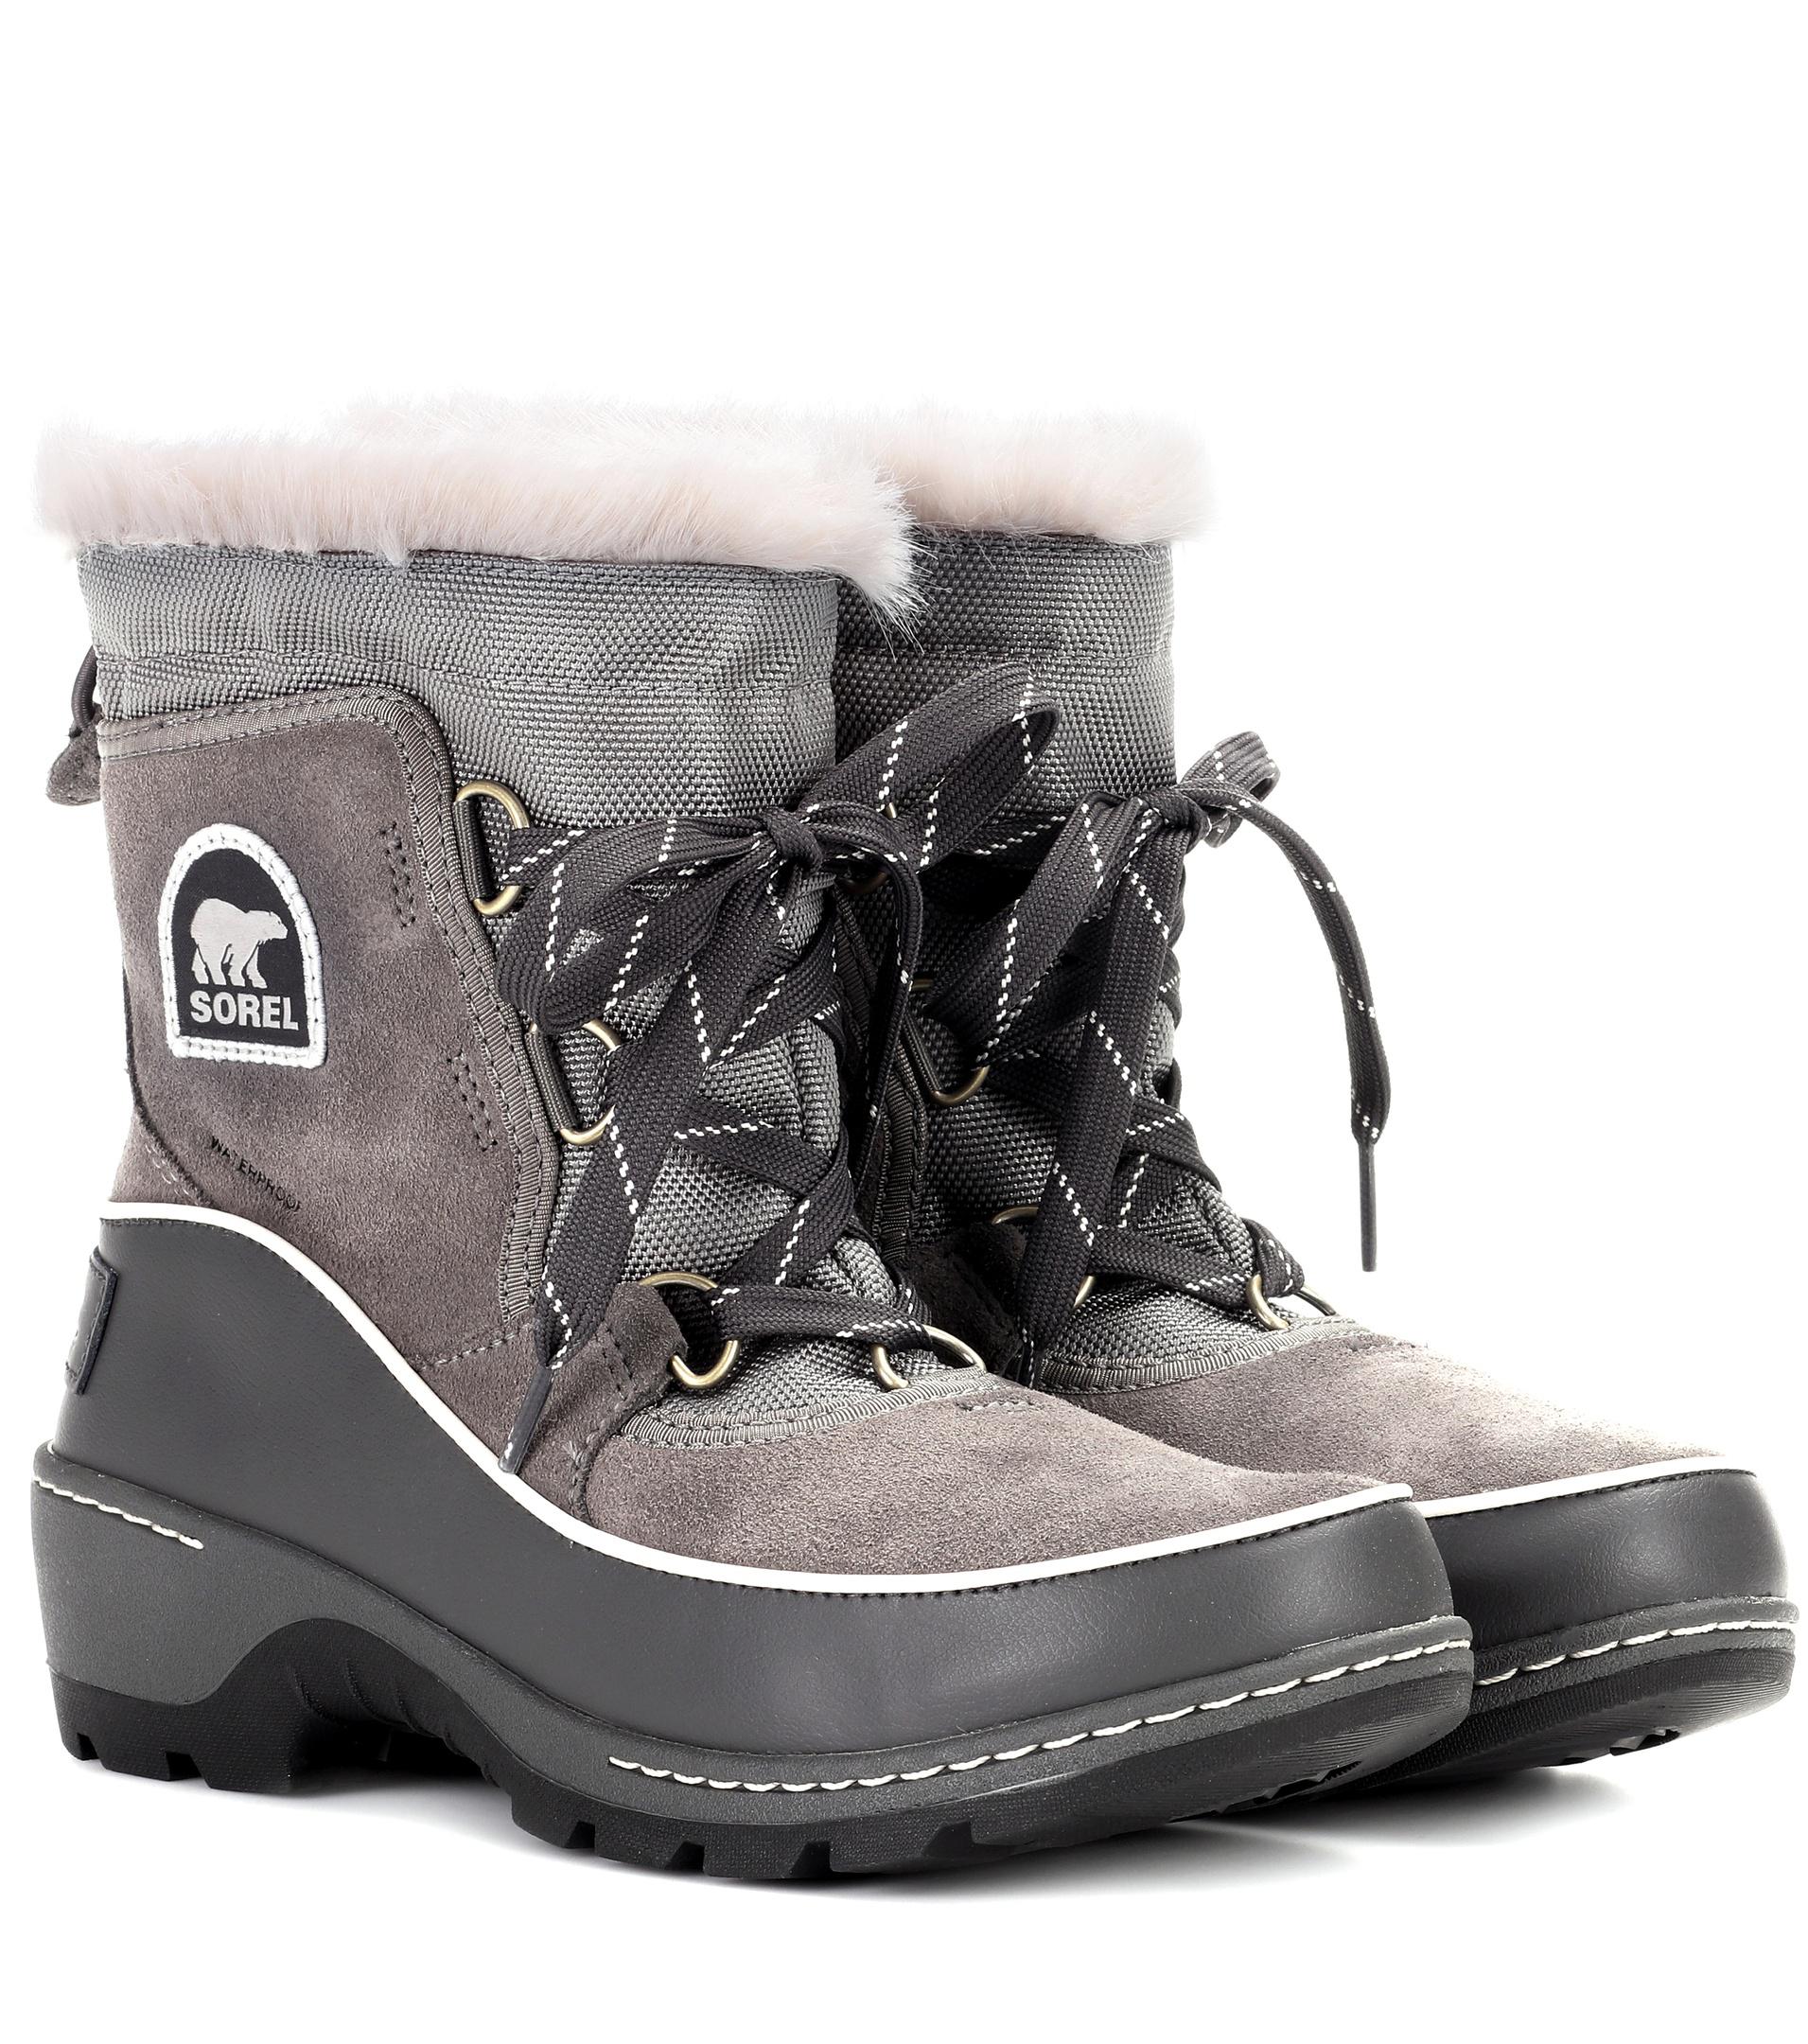 Sorel Torino Leather And Suede Snow Boots in Grey (Gray) - Lyst